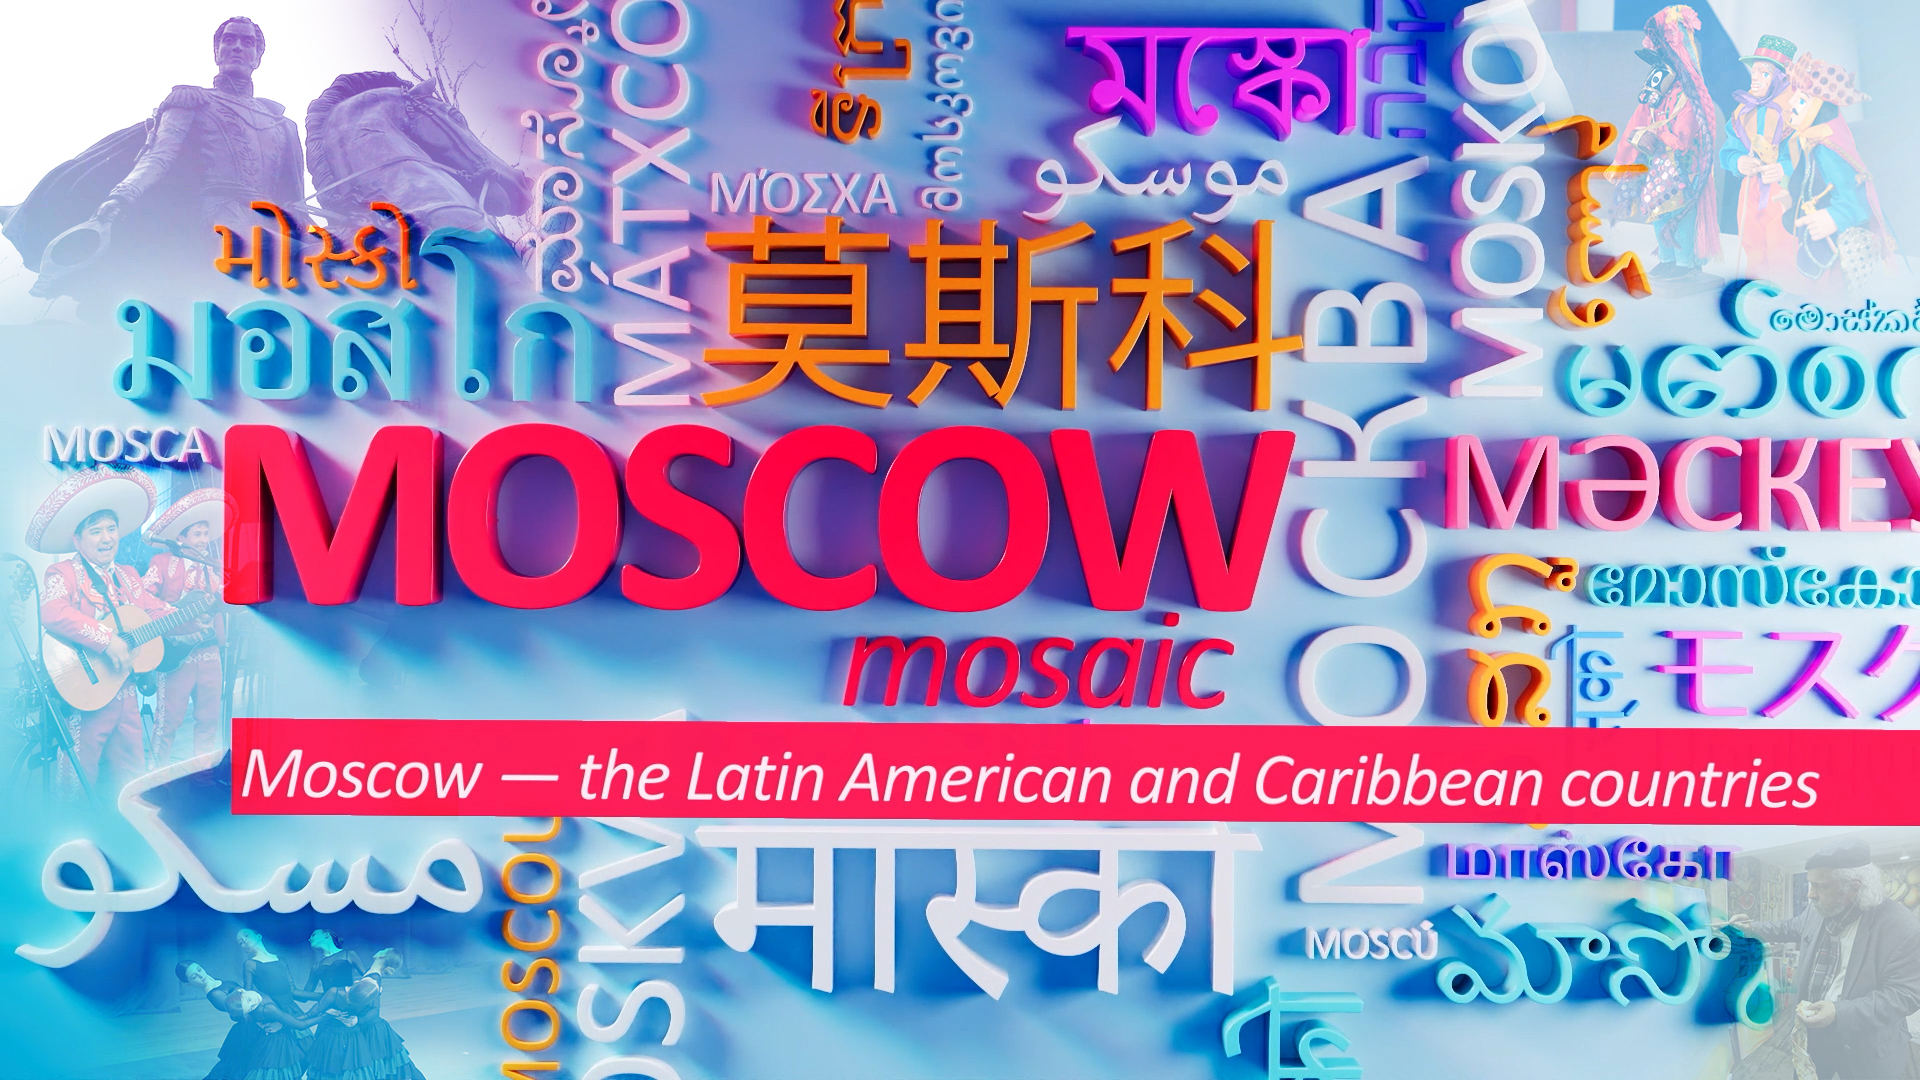 "Moscow Mosaic" - Moscow - the Latin American and Caribbean countries